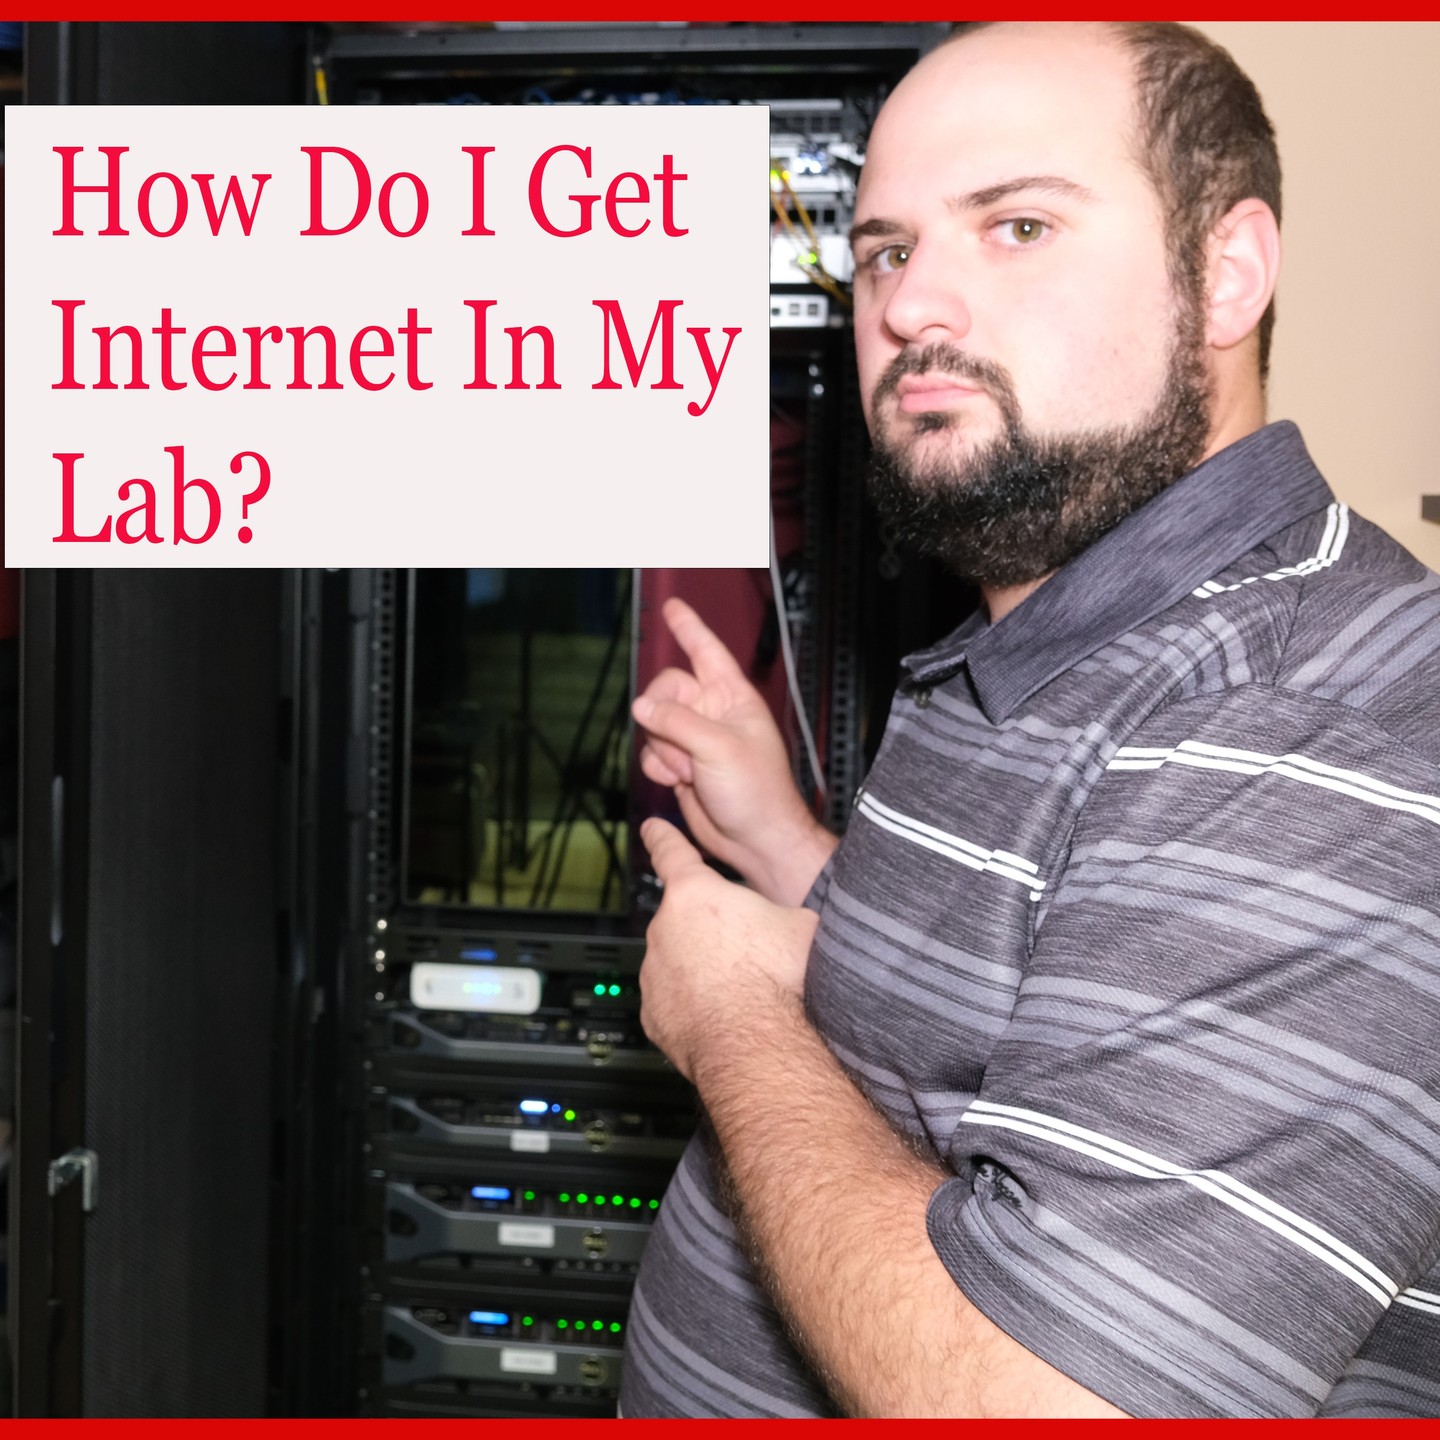 How do I get an internet connection in my lab? I've been asked this question many times as I've made my videos. Check out my latest video, link in bio. #achsysadmin #sysadmin #homelab #network #itlab #unifi #pfsense #systemadmin #systemsadministrator #achubbard #ach_sysadmin #vmware #dell #servers #homenetwork